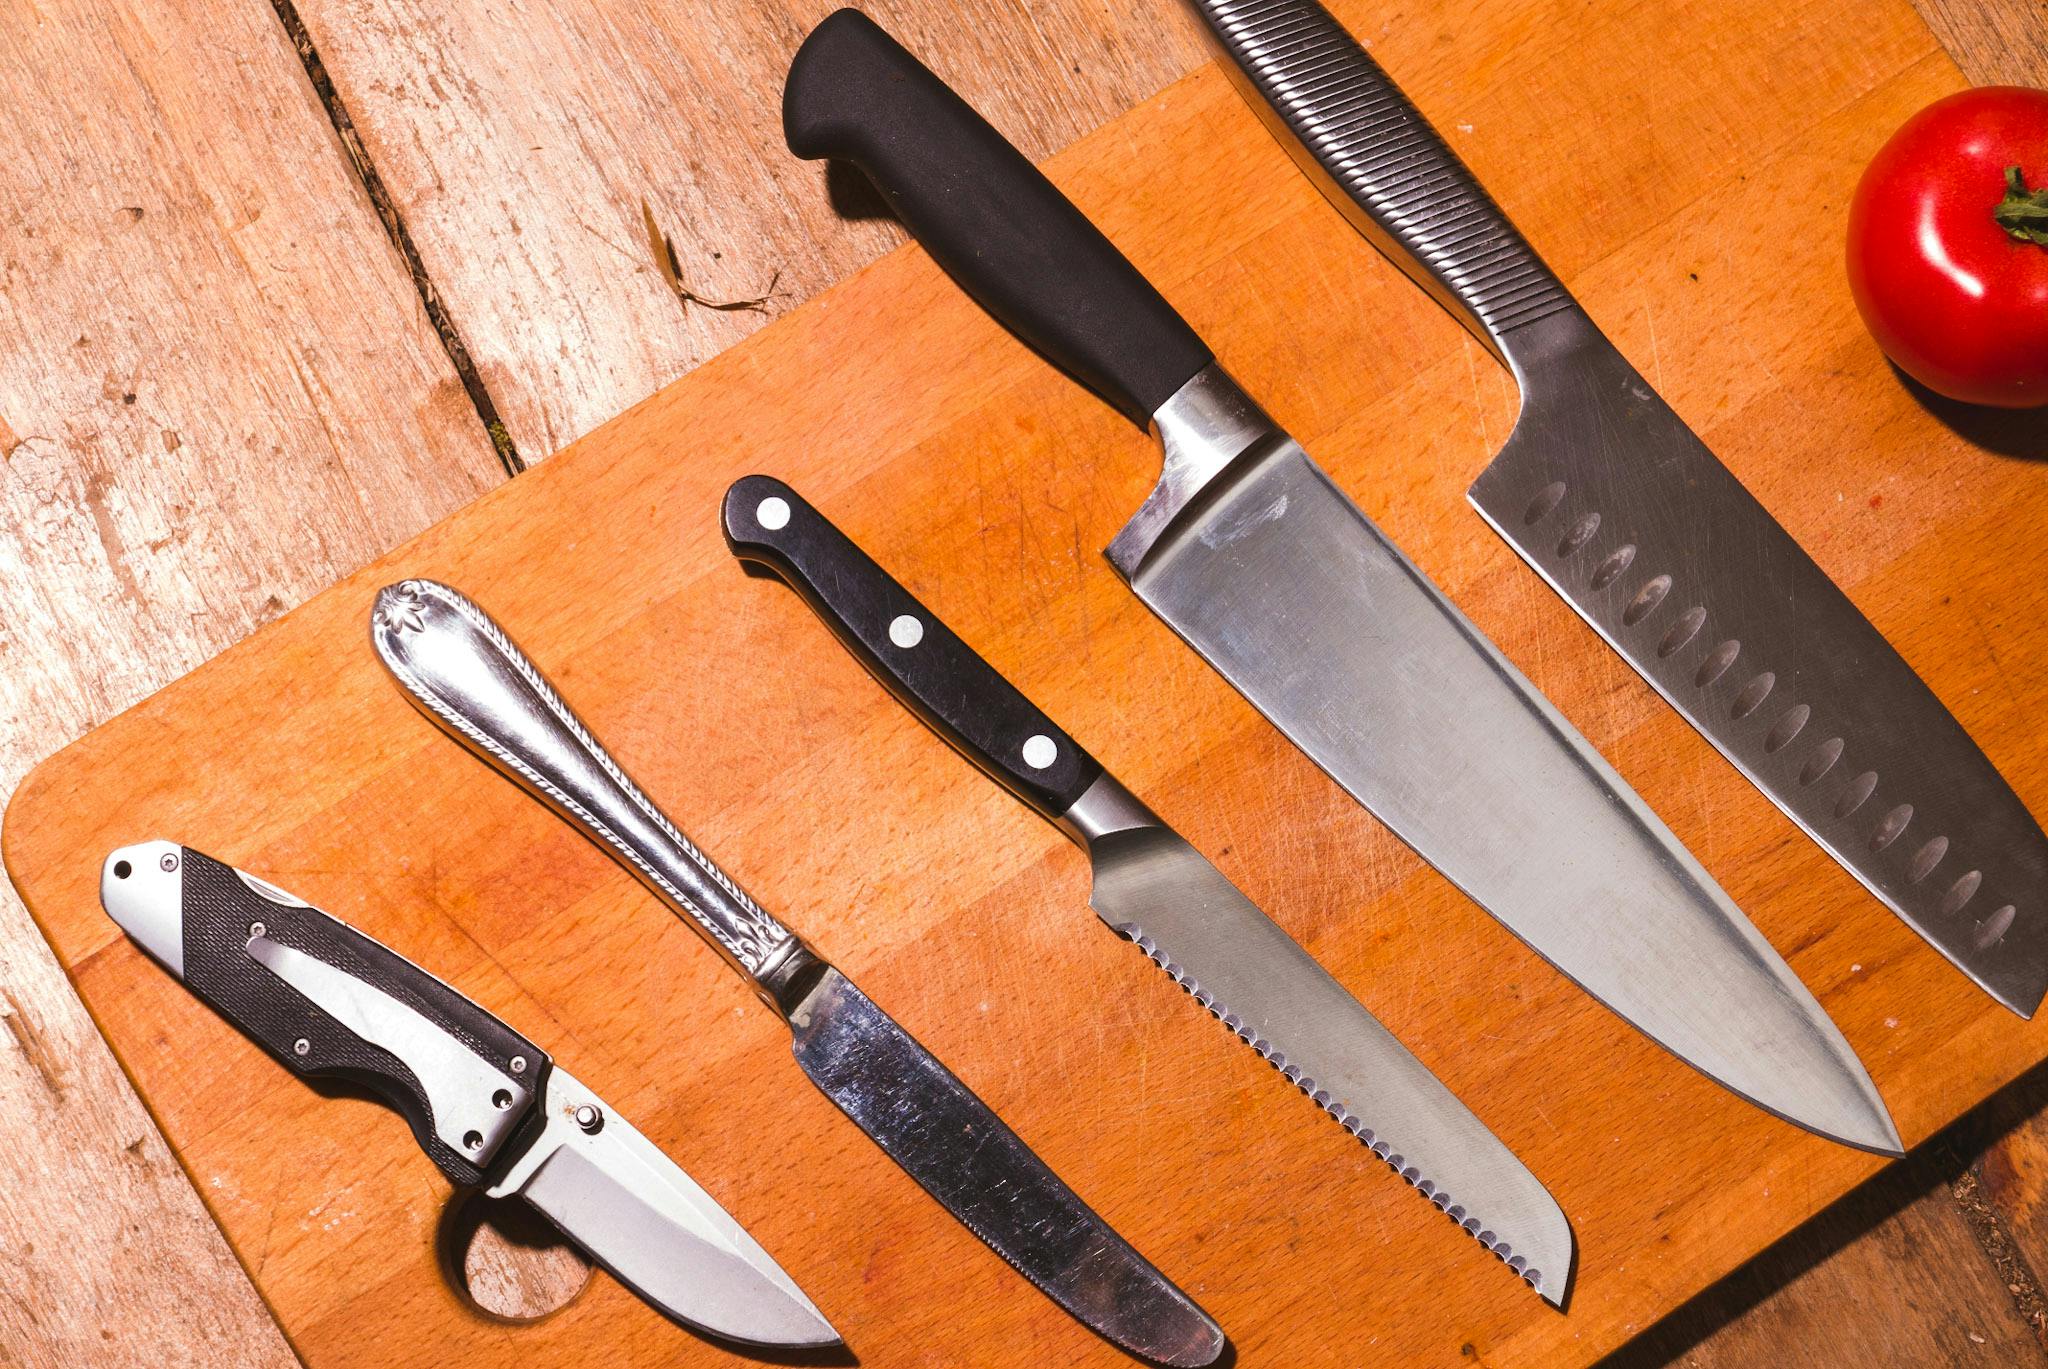 The different pieces of a knife set